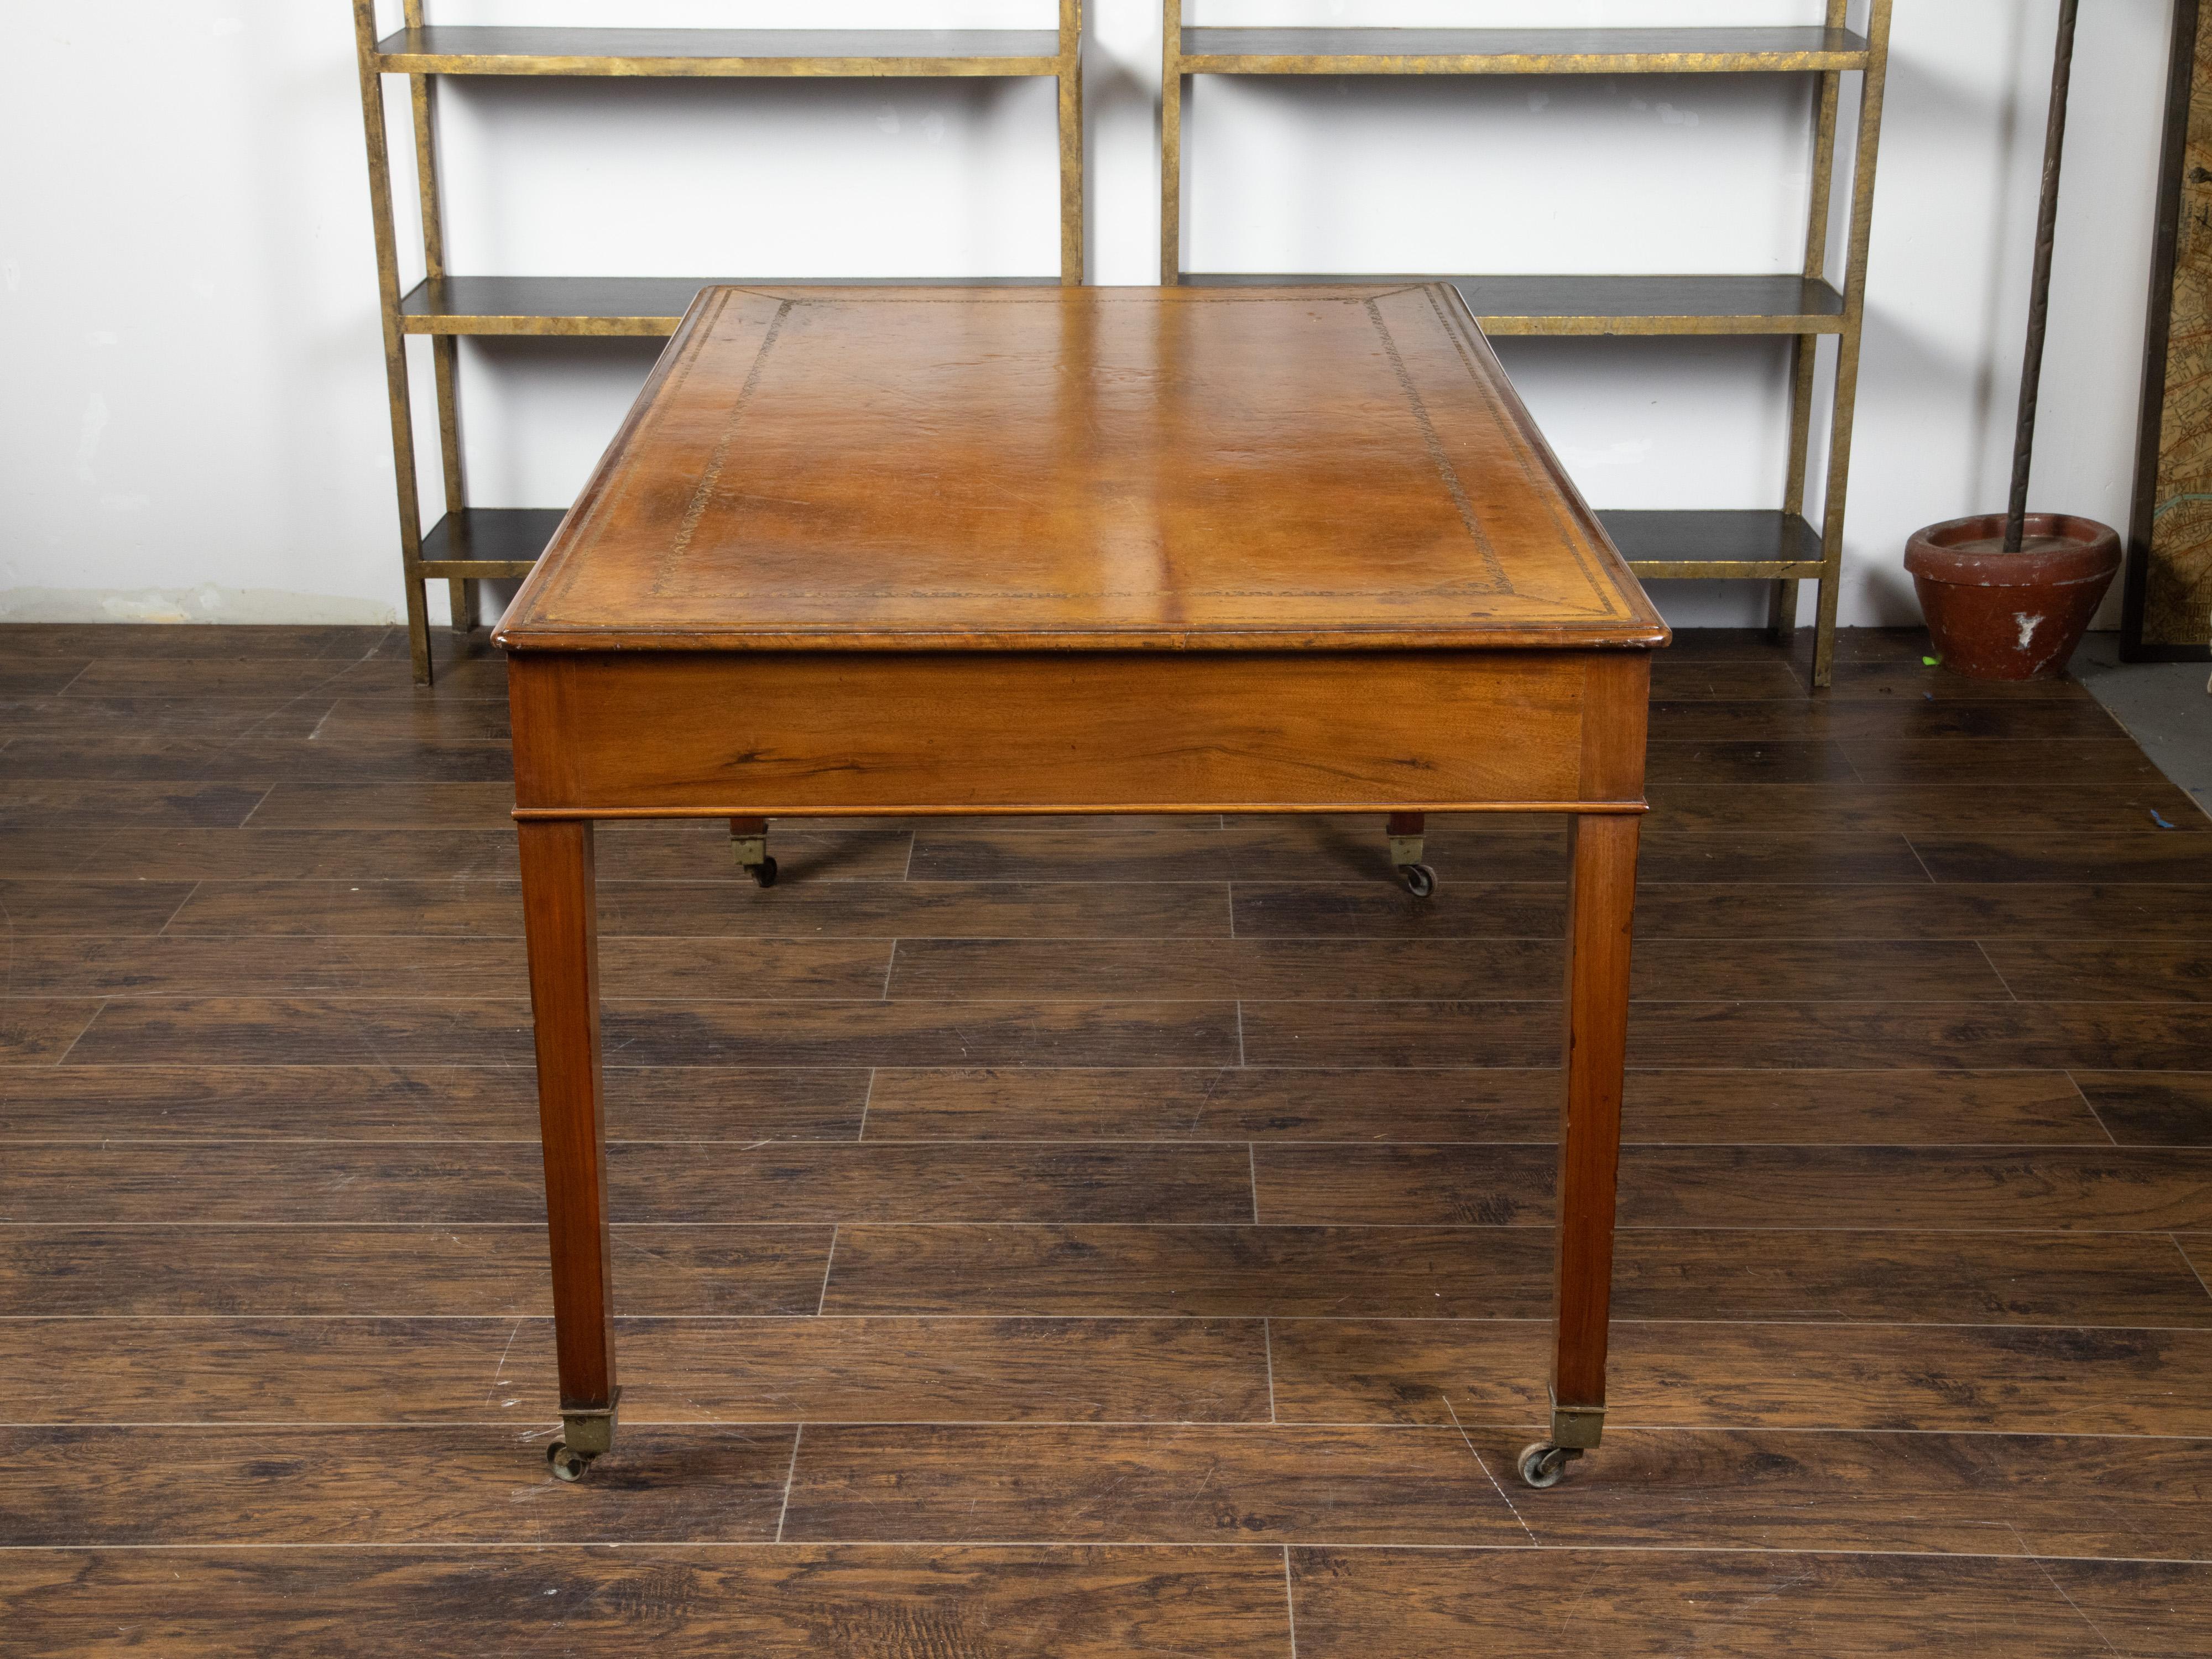 Leather English 19th Century Mahogany Desk with Three Drawers, Mounted on Brass Casters